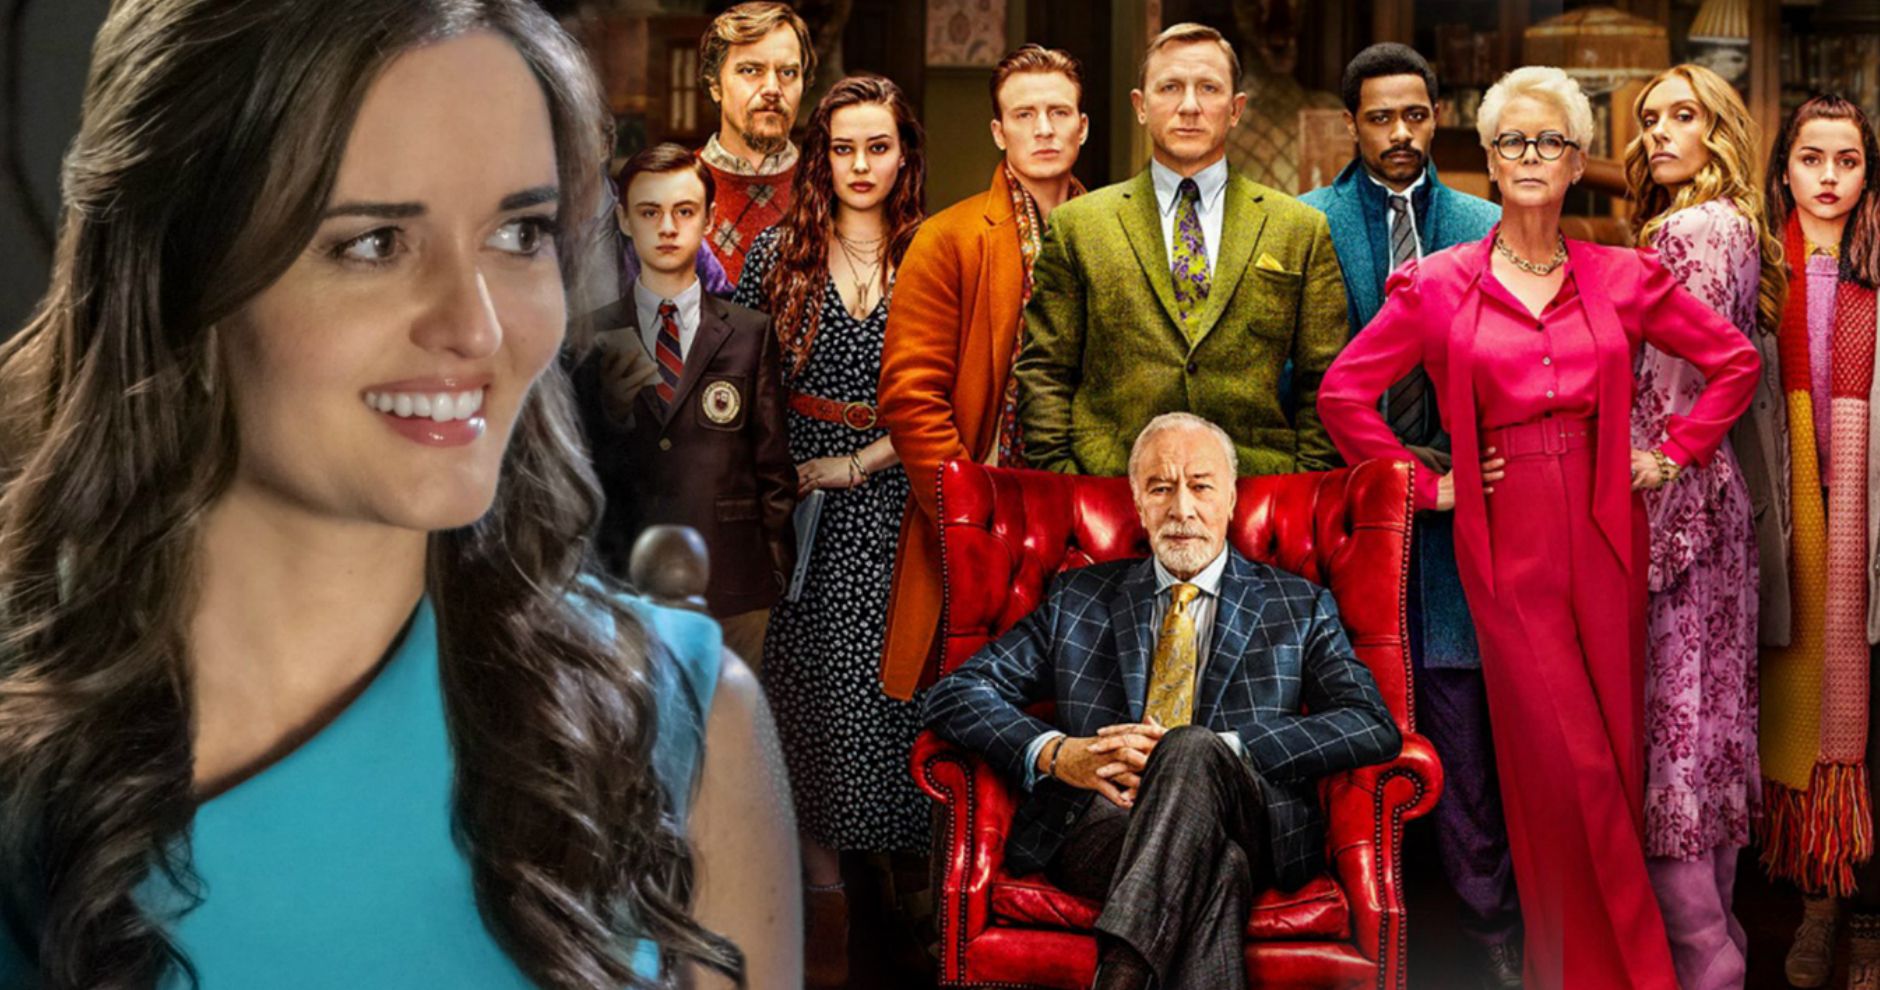 Danica McKellar Responds to Knives Out Name Drop and Hallmark Movie References